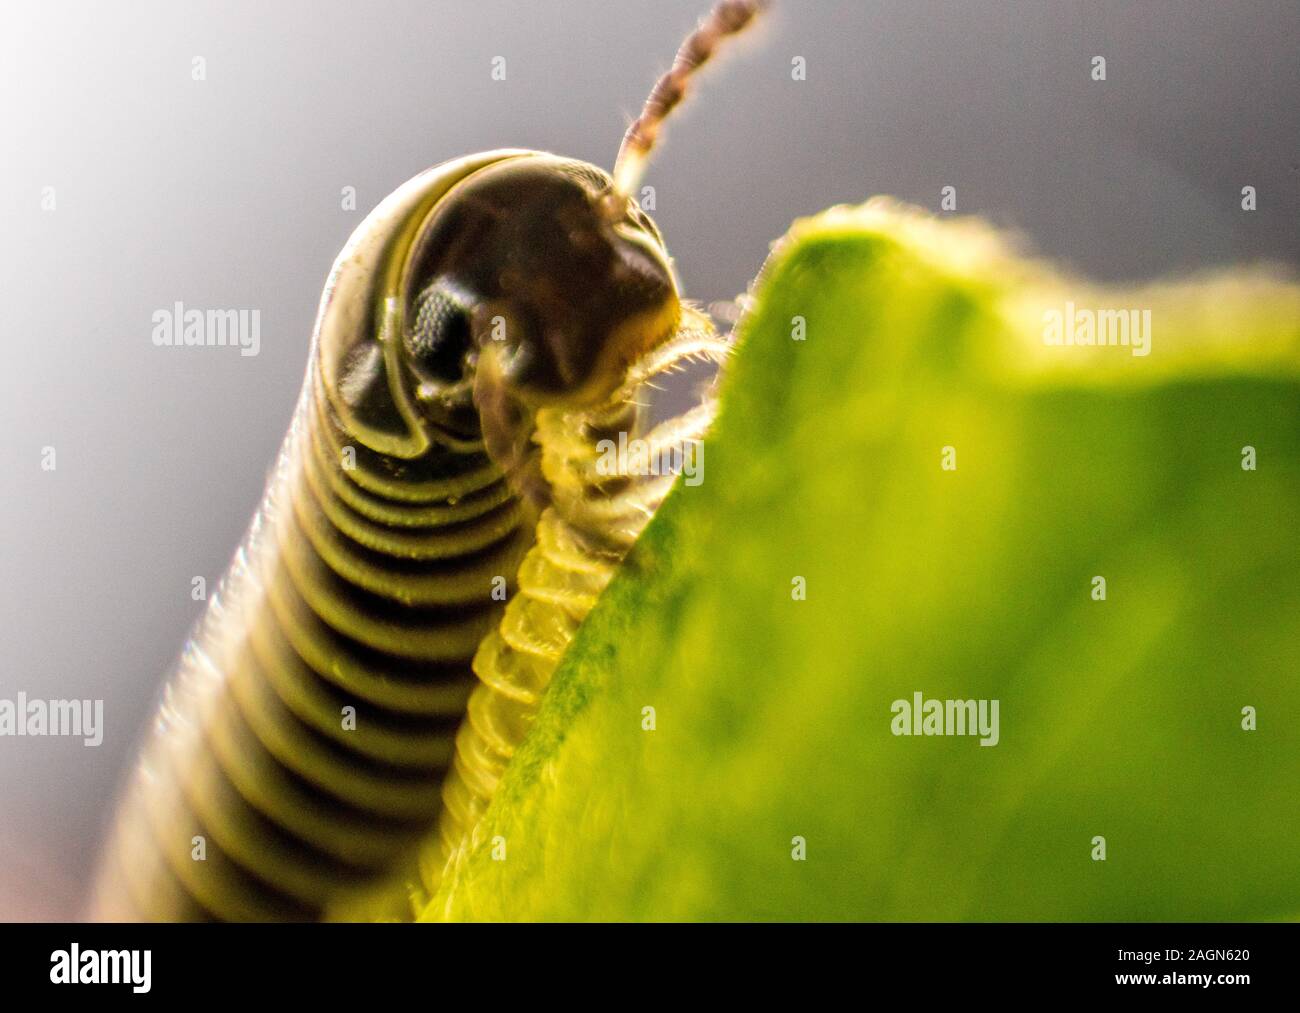 A closeup of a millipede insect with it's amazing armored body and lots of legs. Stock Photo